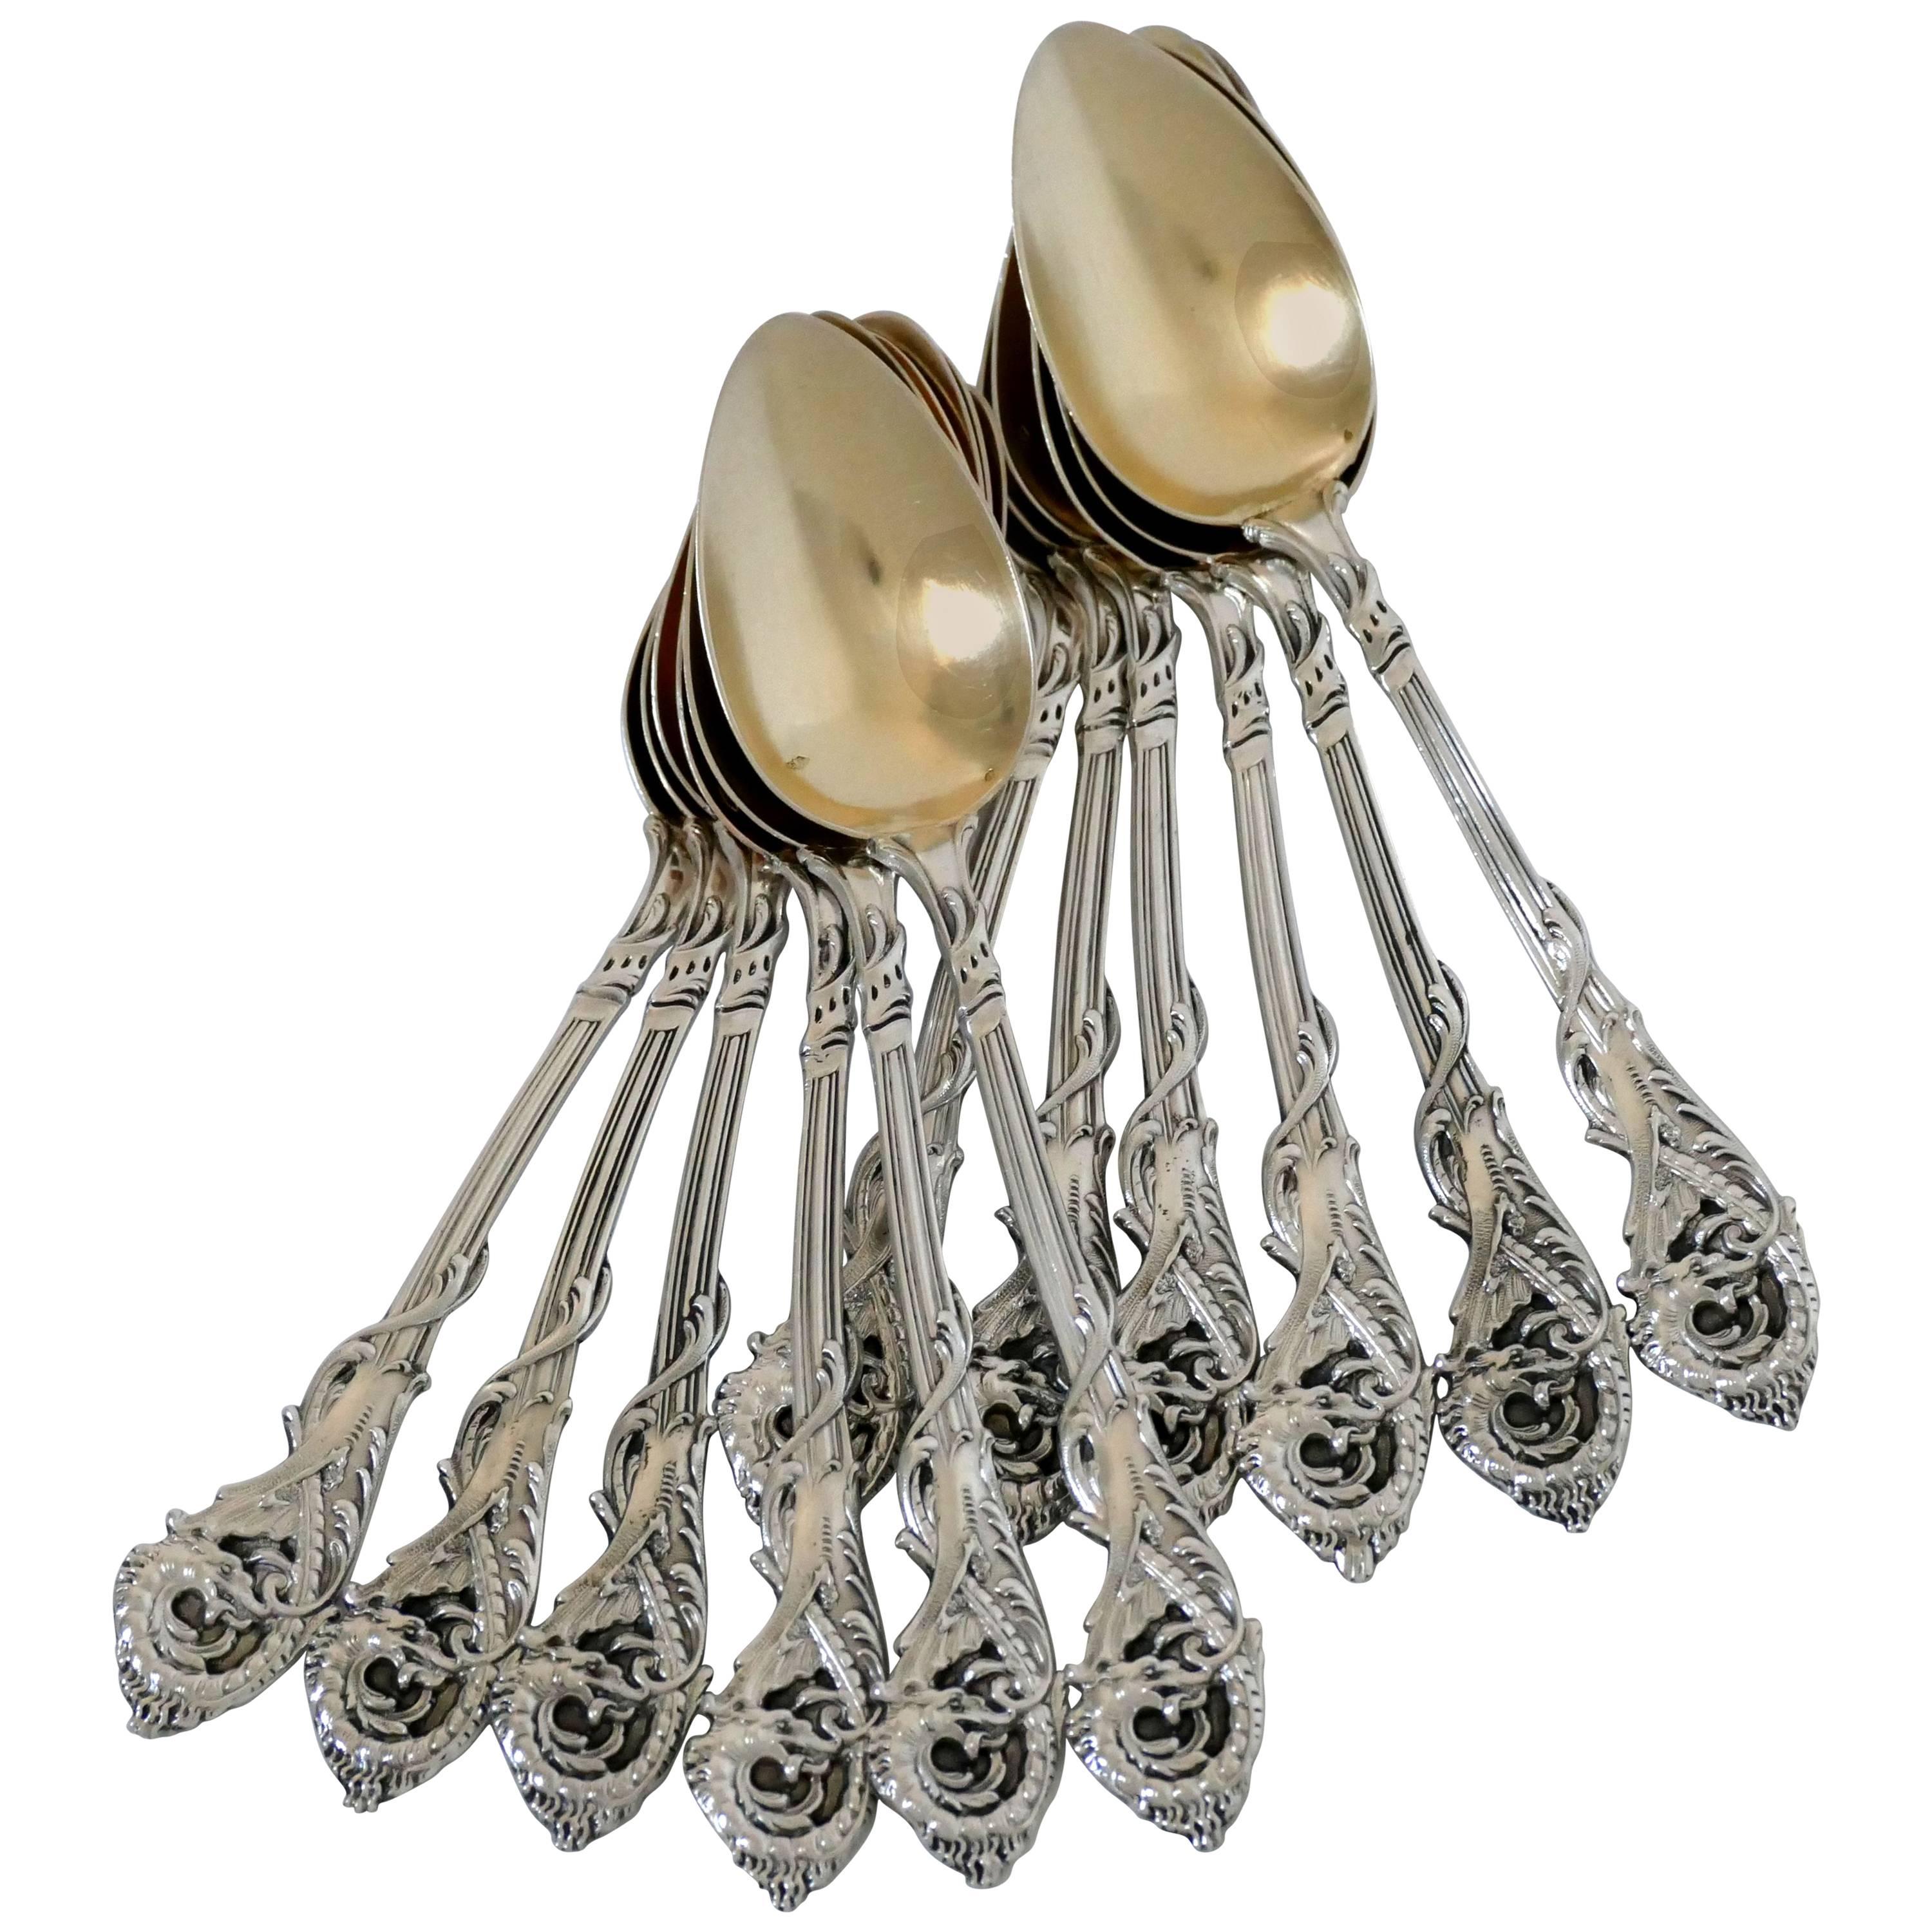 Veyrat Rare French Sterling Silver 18k Gold Tea Coffee Spoons Set 12 Pc, Dragon For Sale